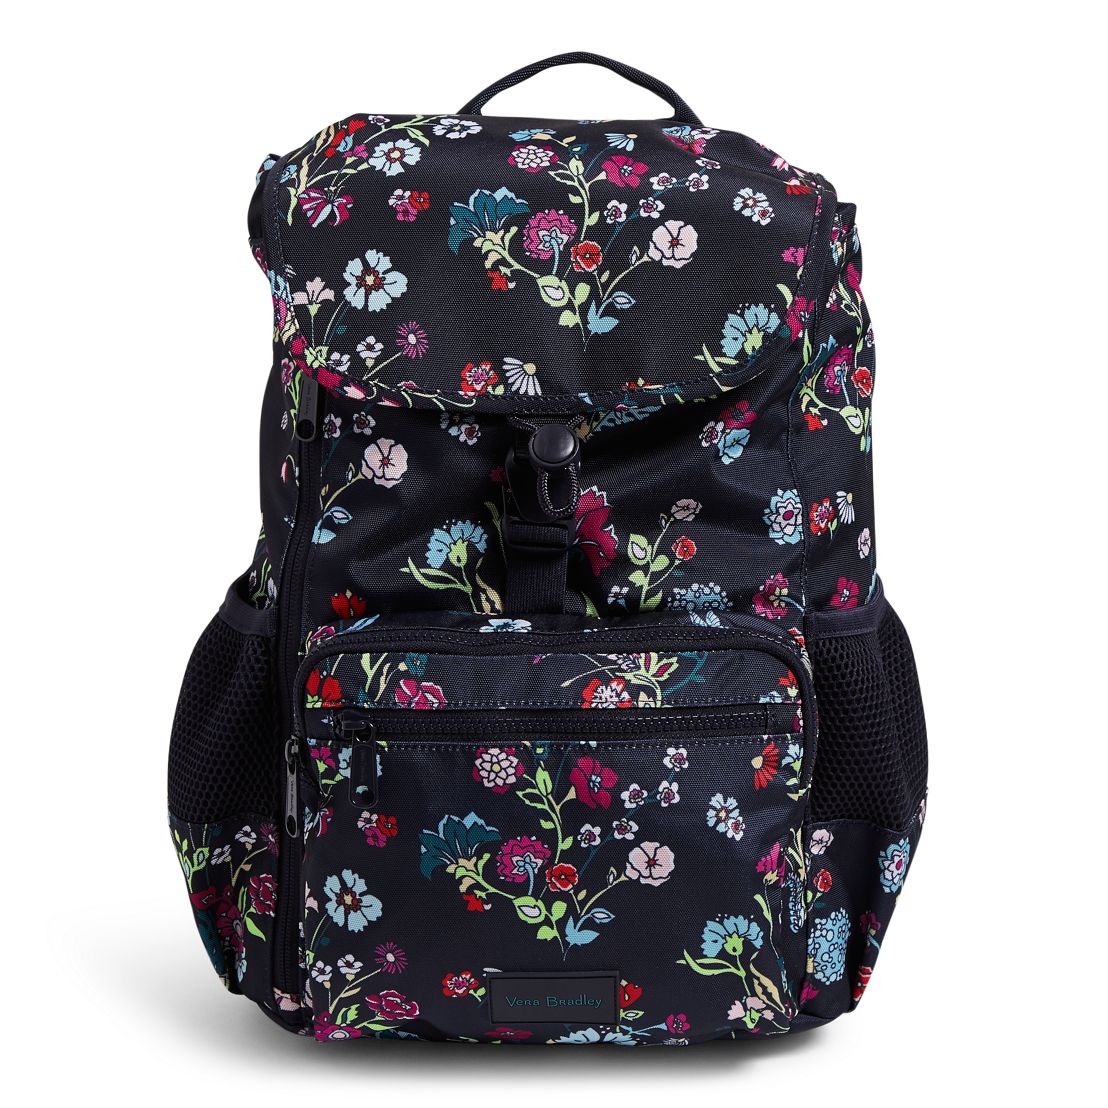 Vera Bradley ReActive Daytripper Backpack in Itsy Ditsy Floral